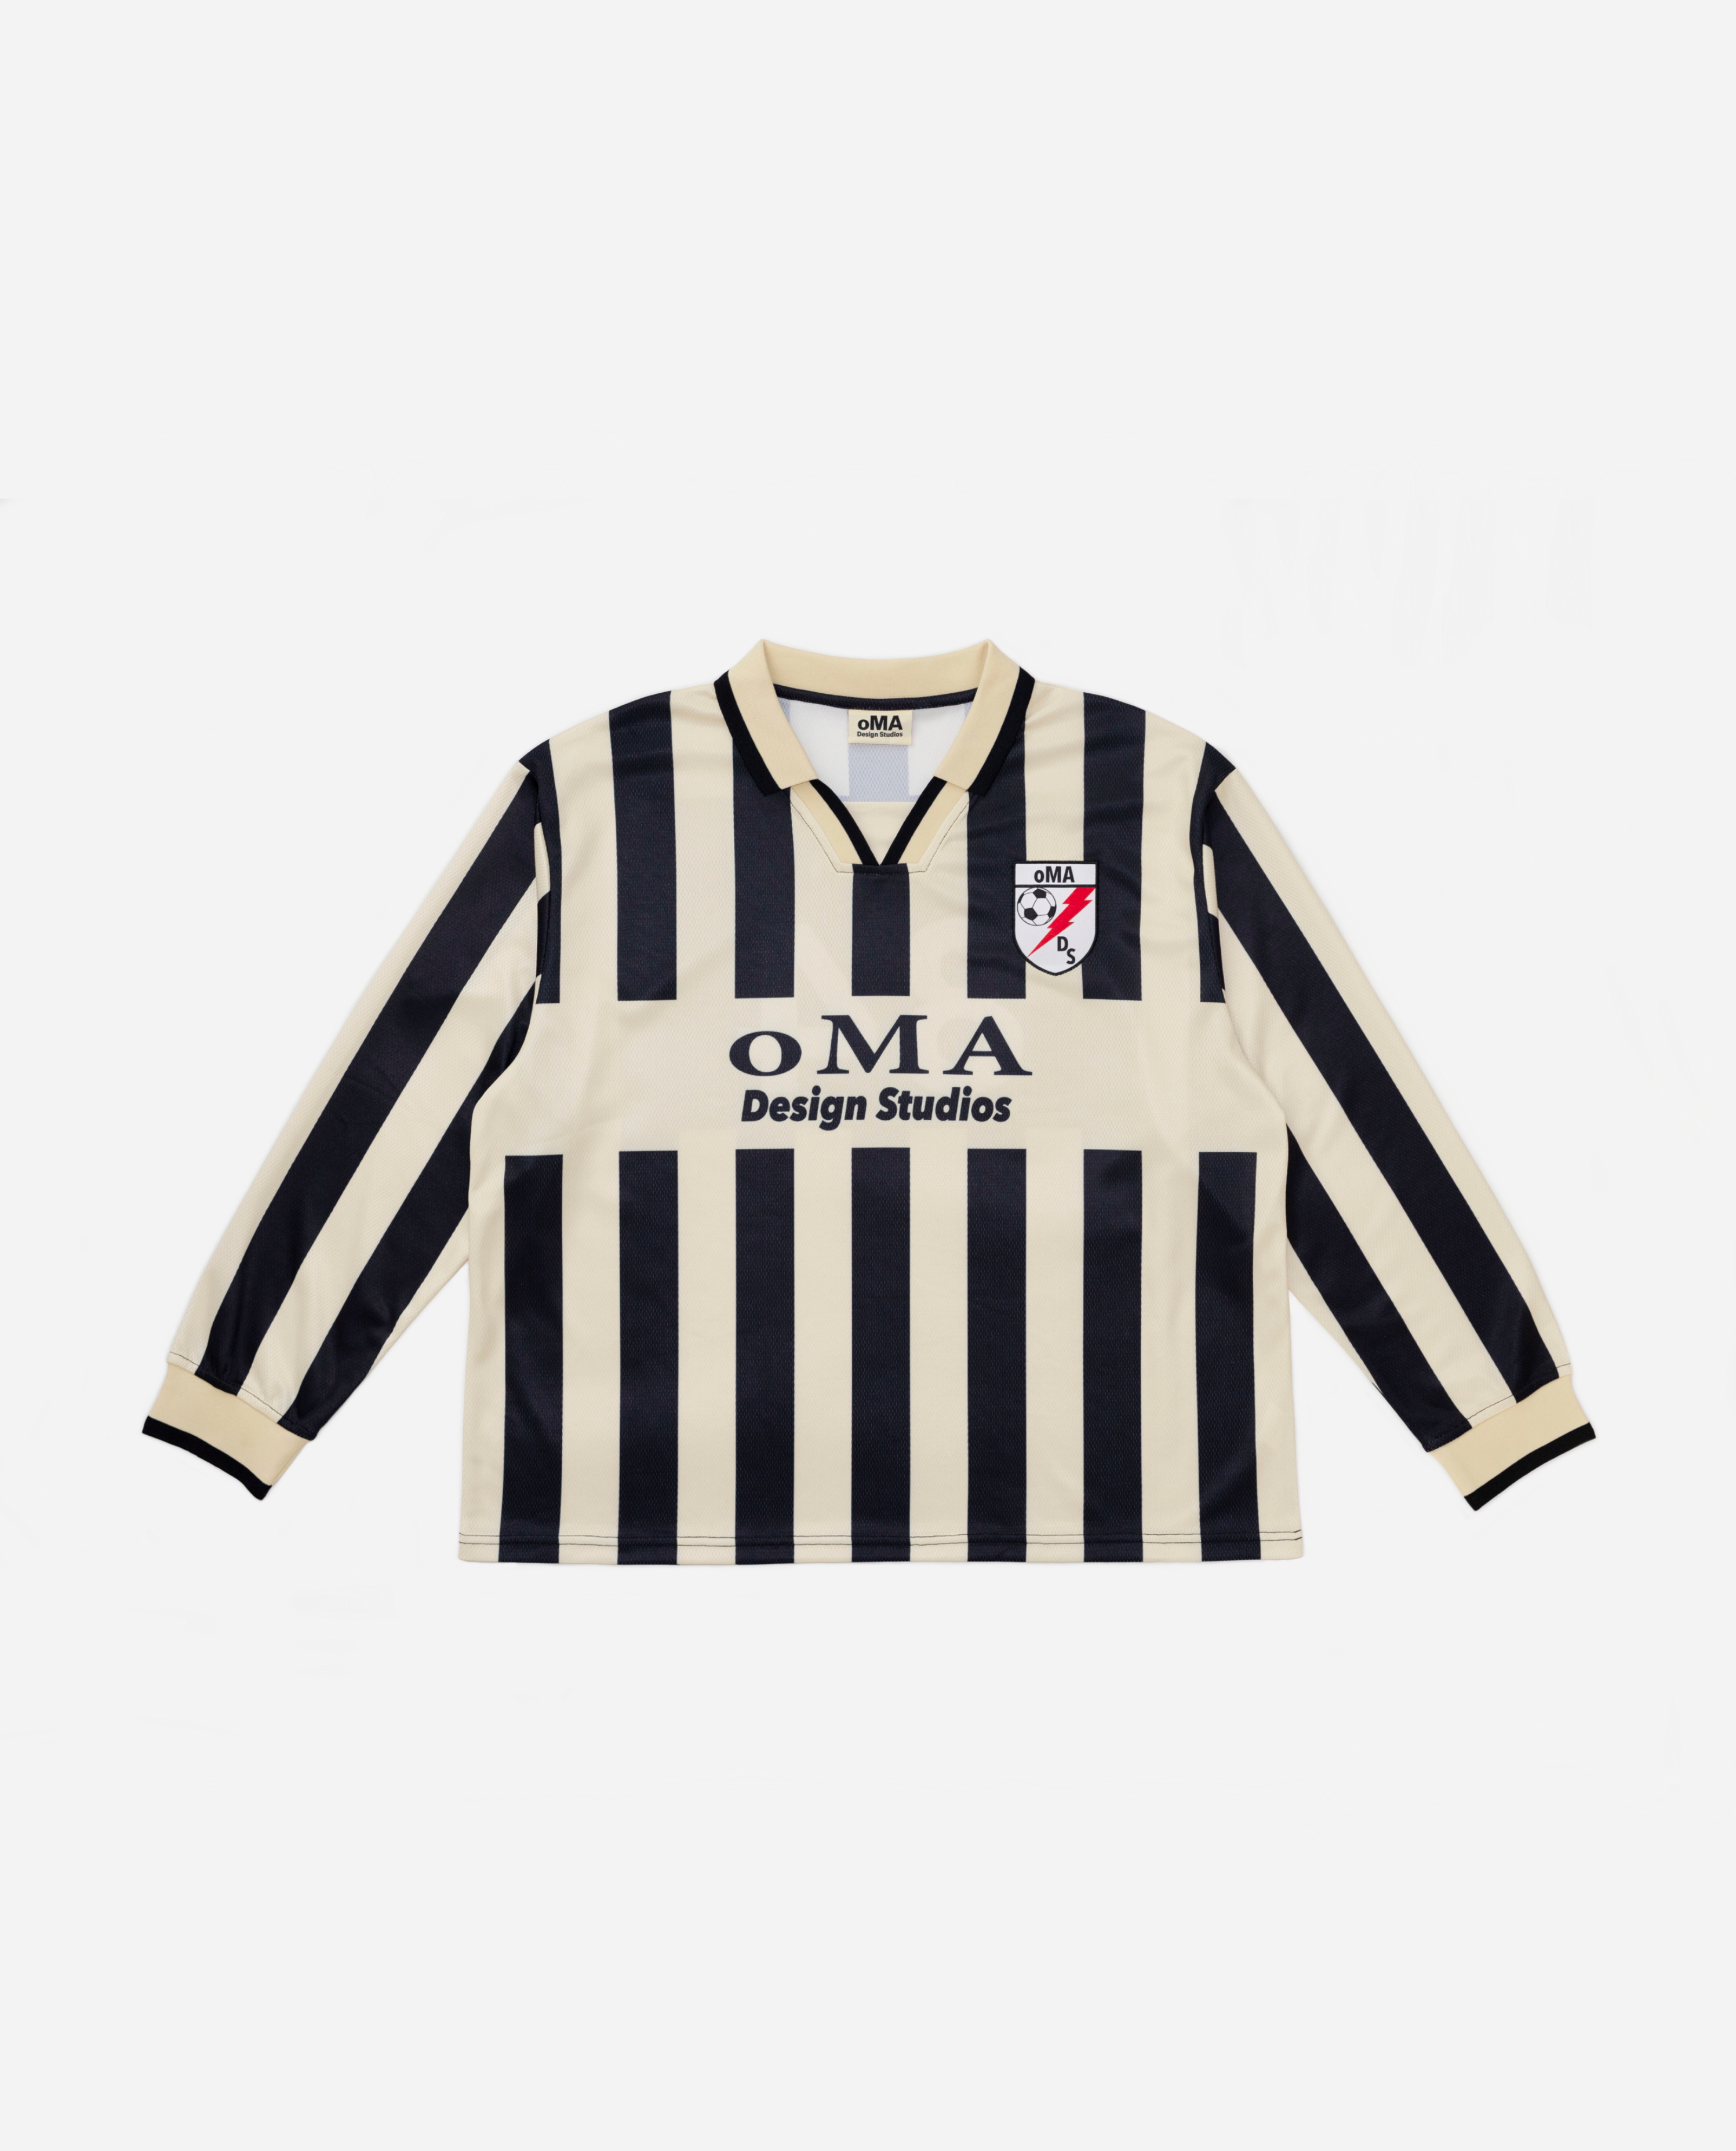 oMA DS LONG SLEEVE SOCCER JERSEY